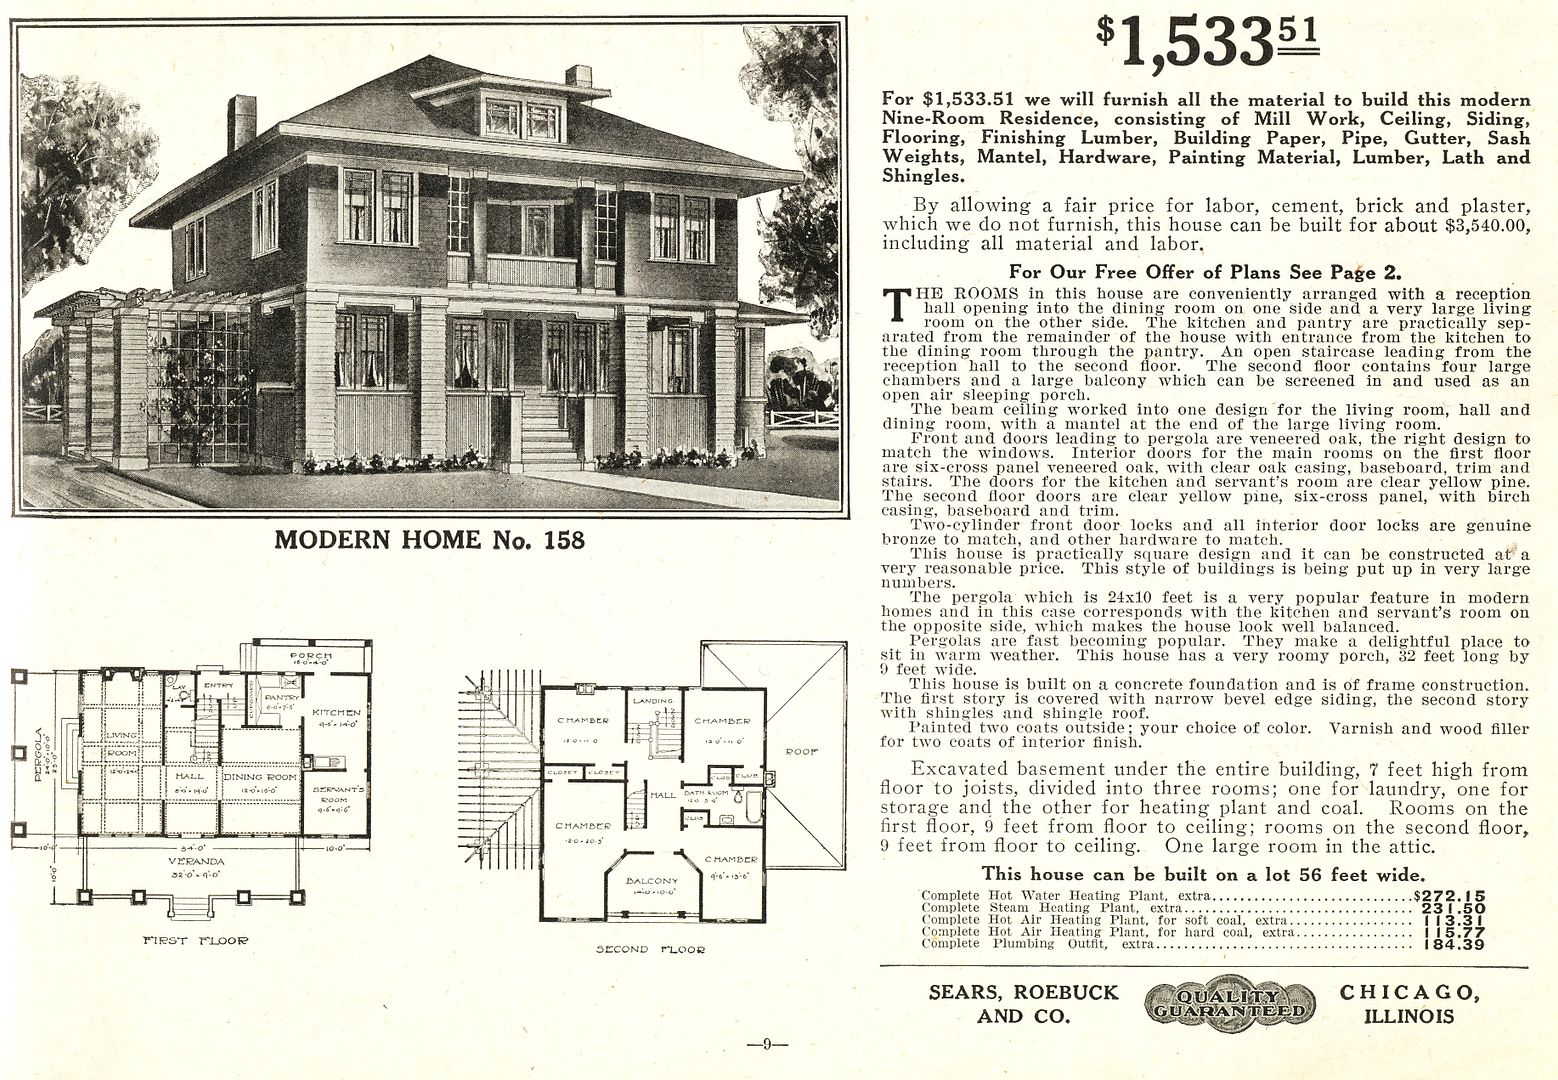 Sears Modern Home #158, as seen in the 1910 catalog. 